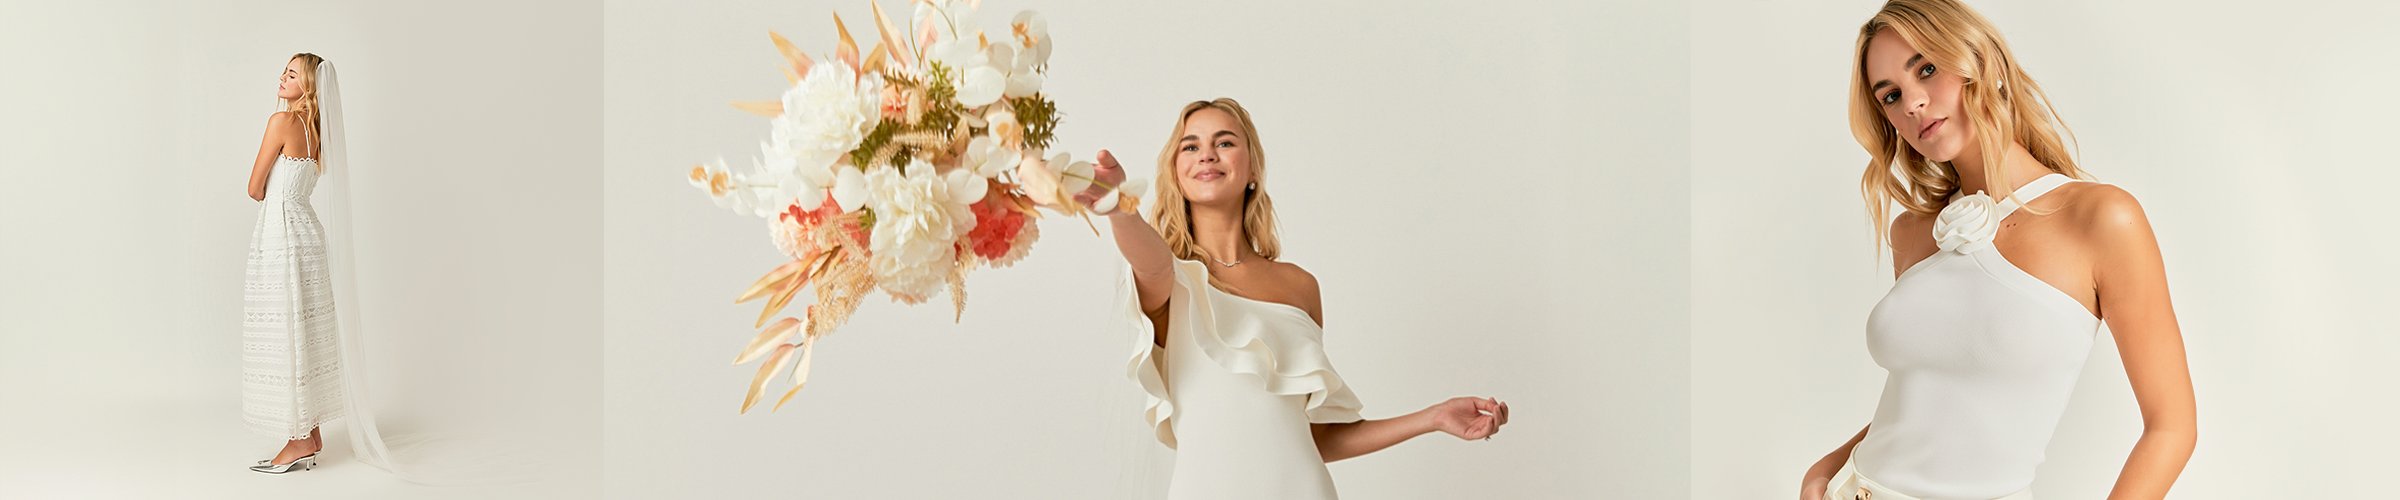 Discover The Wedding Shop Collection from Endless Rose at endlessrose.com